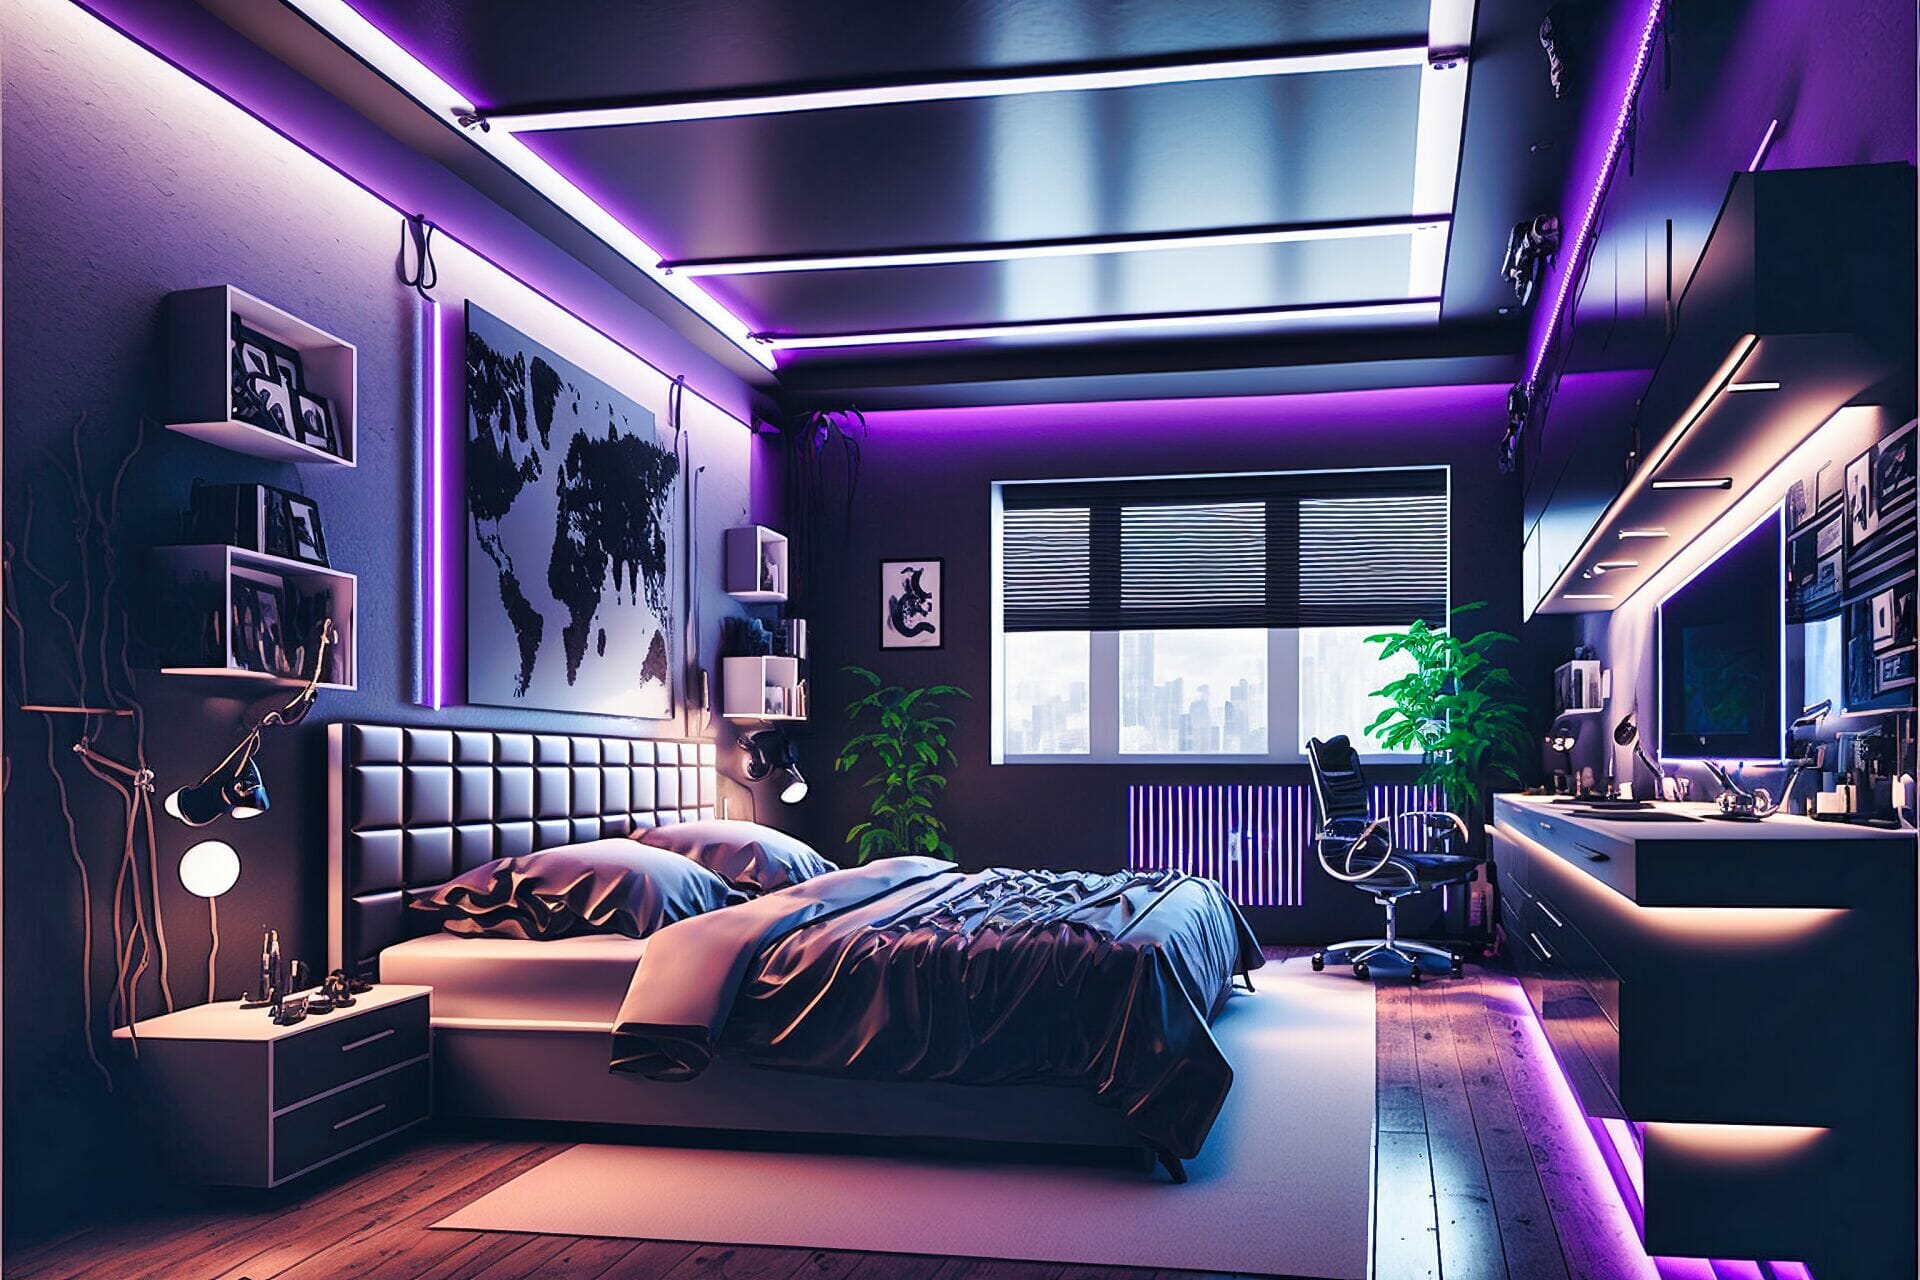 Bedroom With A Futuristic Cyberpunk Style. The Walls Are Painted A Deep Purple, With White Accents And Futuristic Neon Lighting. The Center Of The Room Features A Large, Black Bed, With A Matching Bed Frame And Nightstands. The Lighting Is Low And Ambient, With A Light Strip Running Along The Walls, And A Hanging Neon Bulb Providing The Main Lighting Source. The Floor Is An Industrial Metallic Tile, With A Glossy Finish.